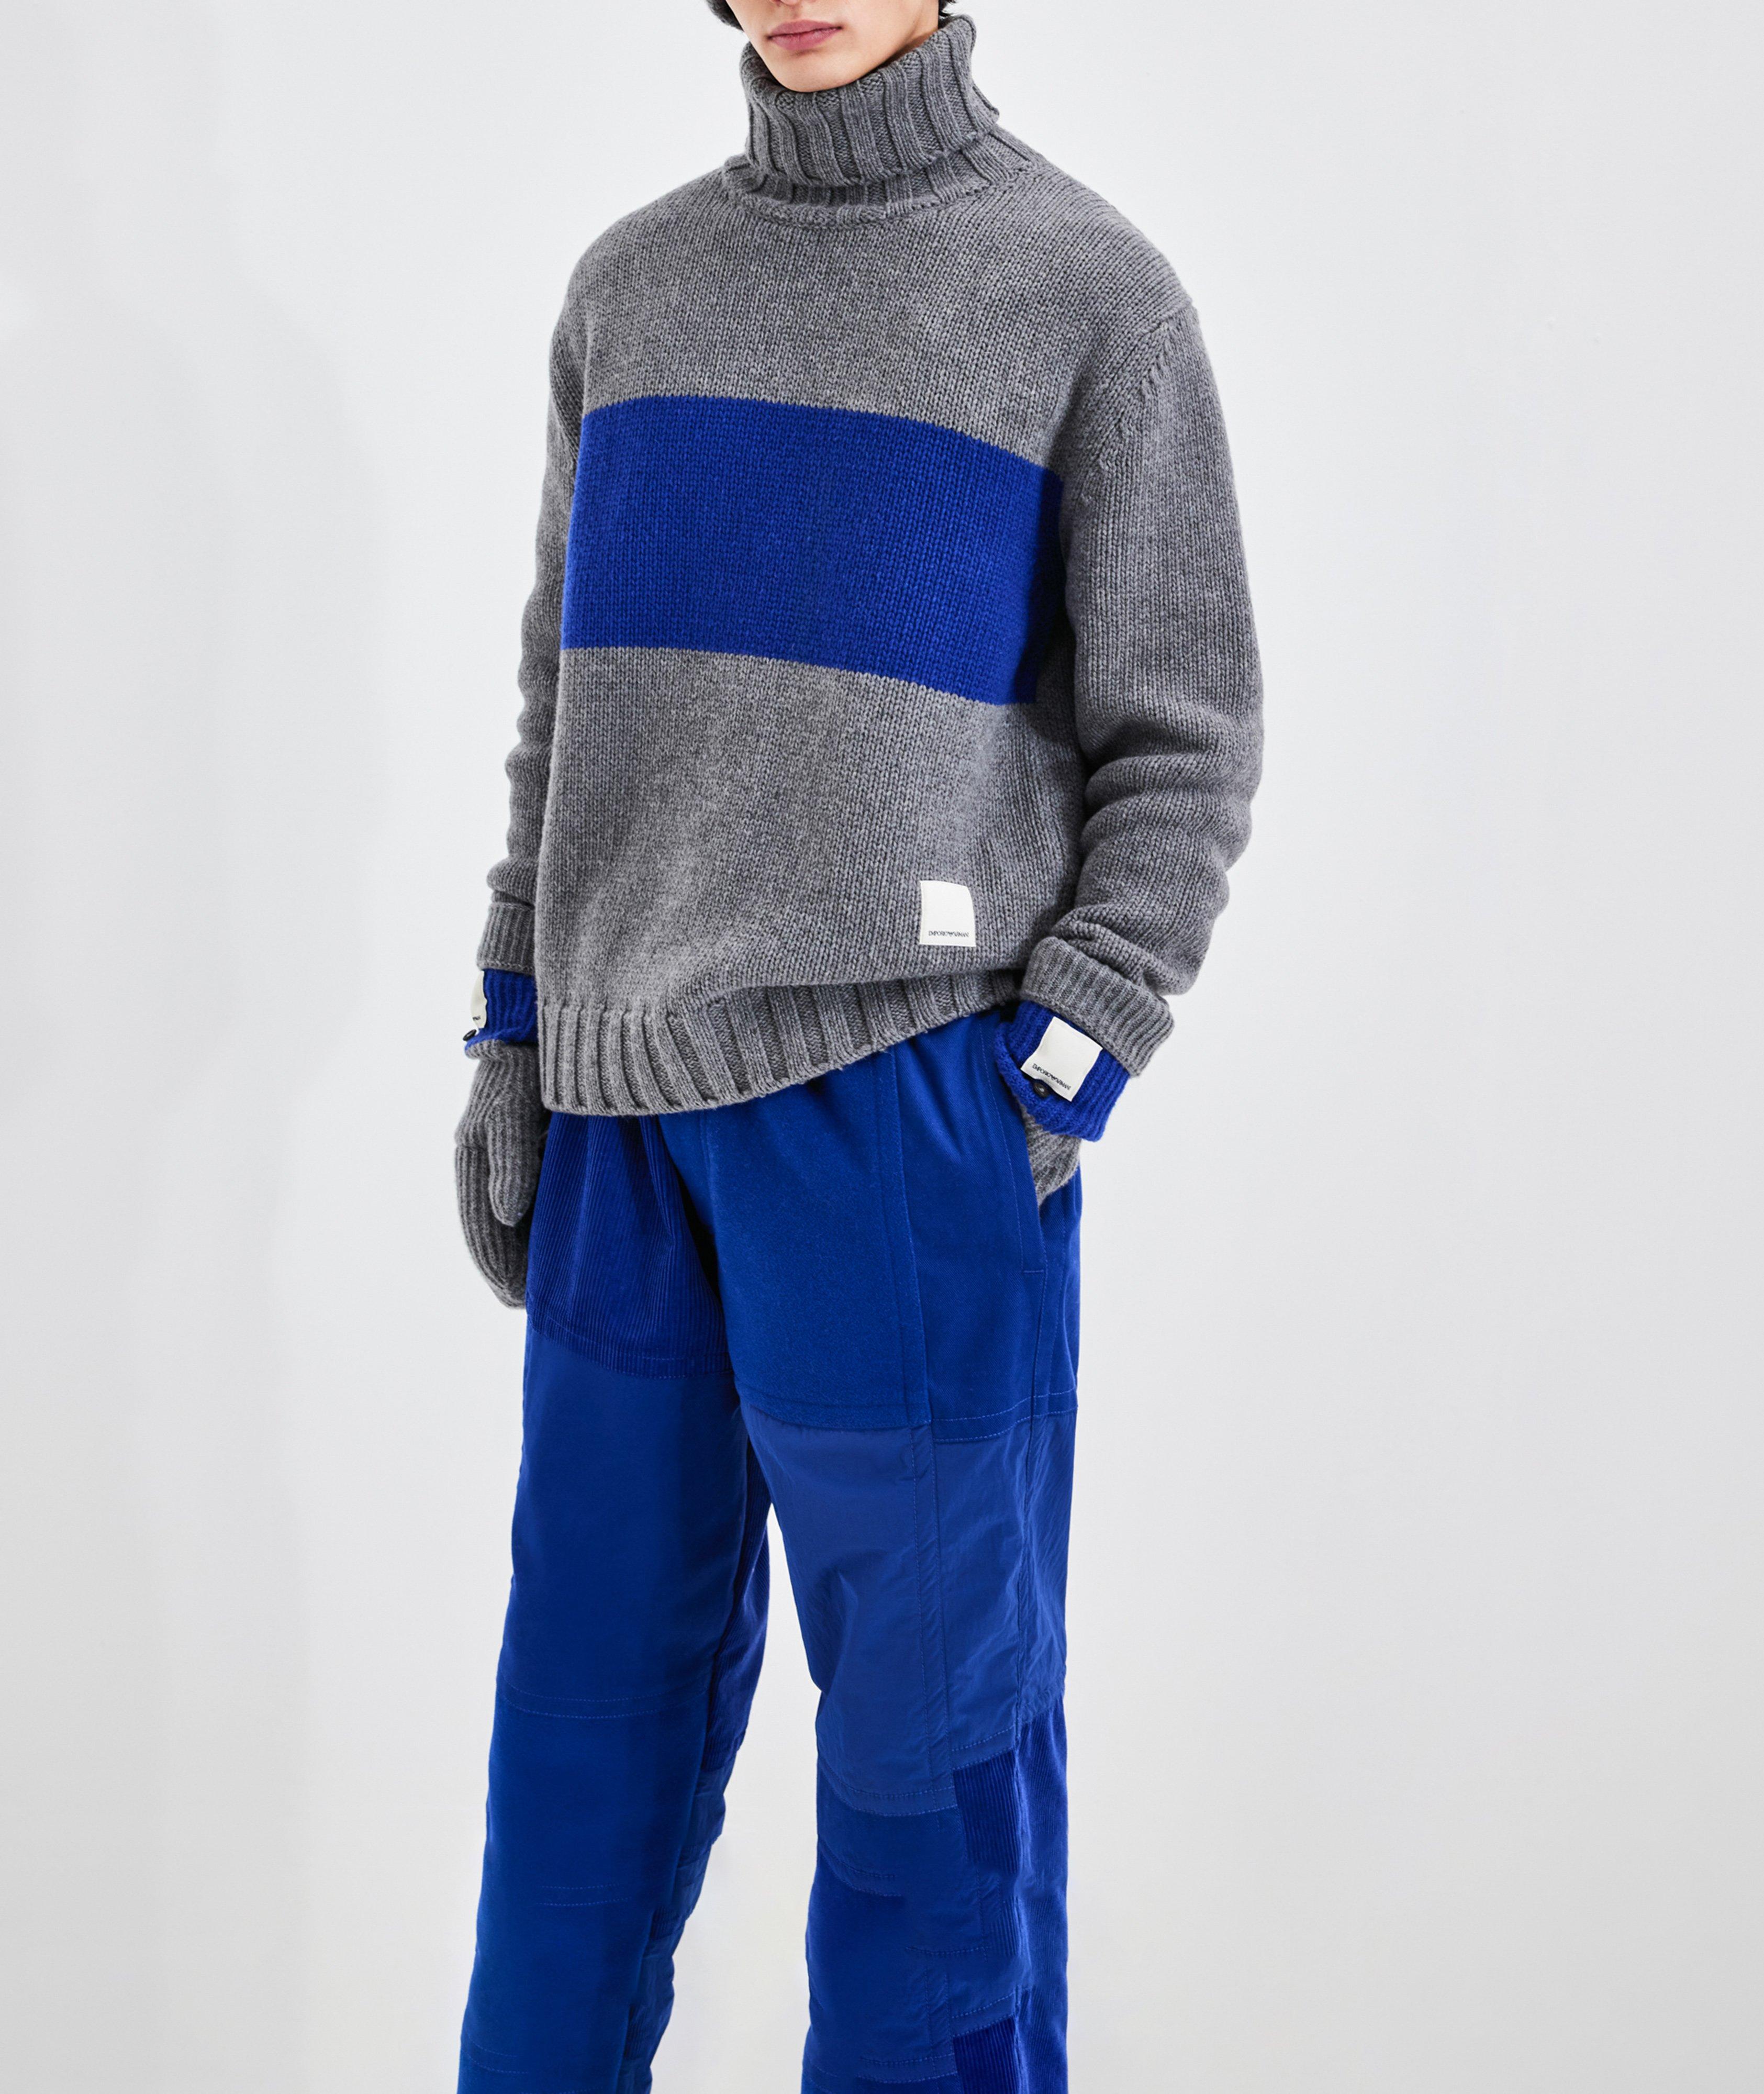 EArctic Sustainable Collection Striped Wool-Blend Knit Turtleneck image 1